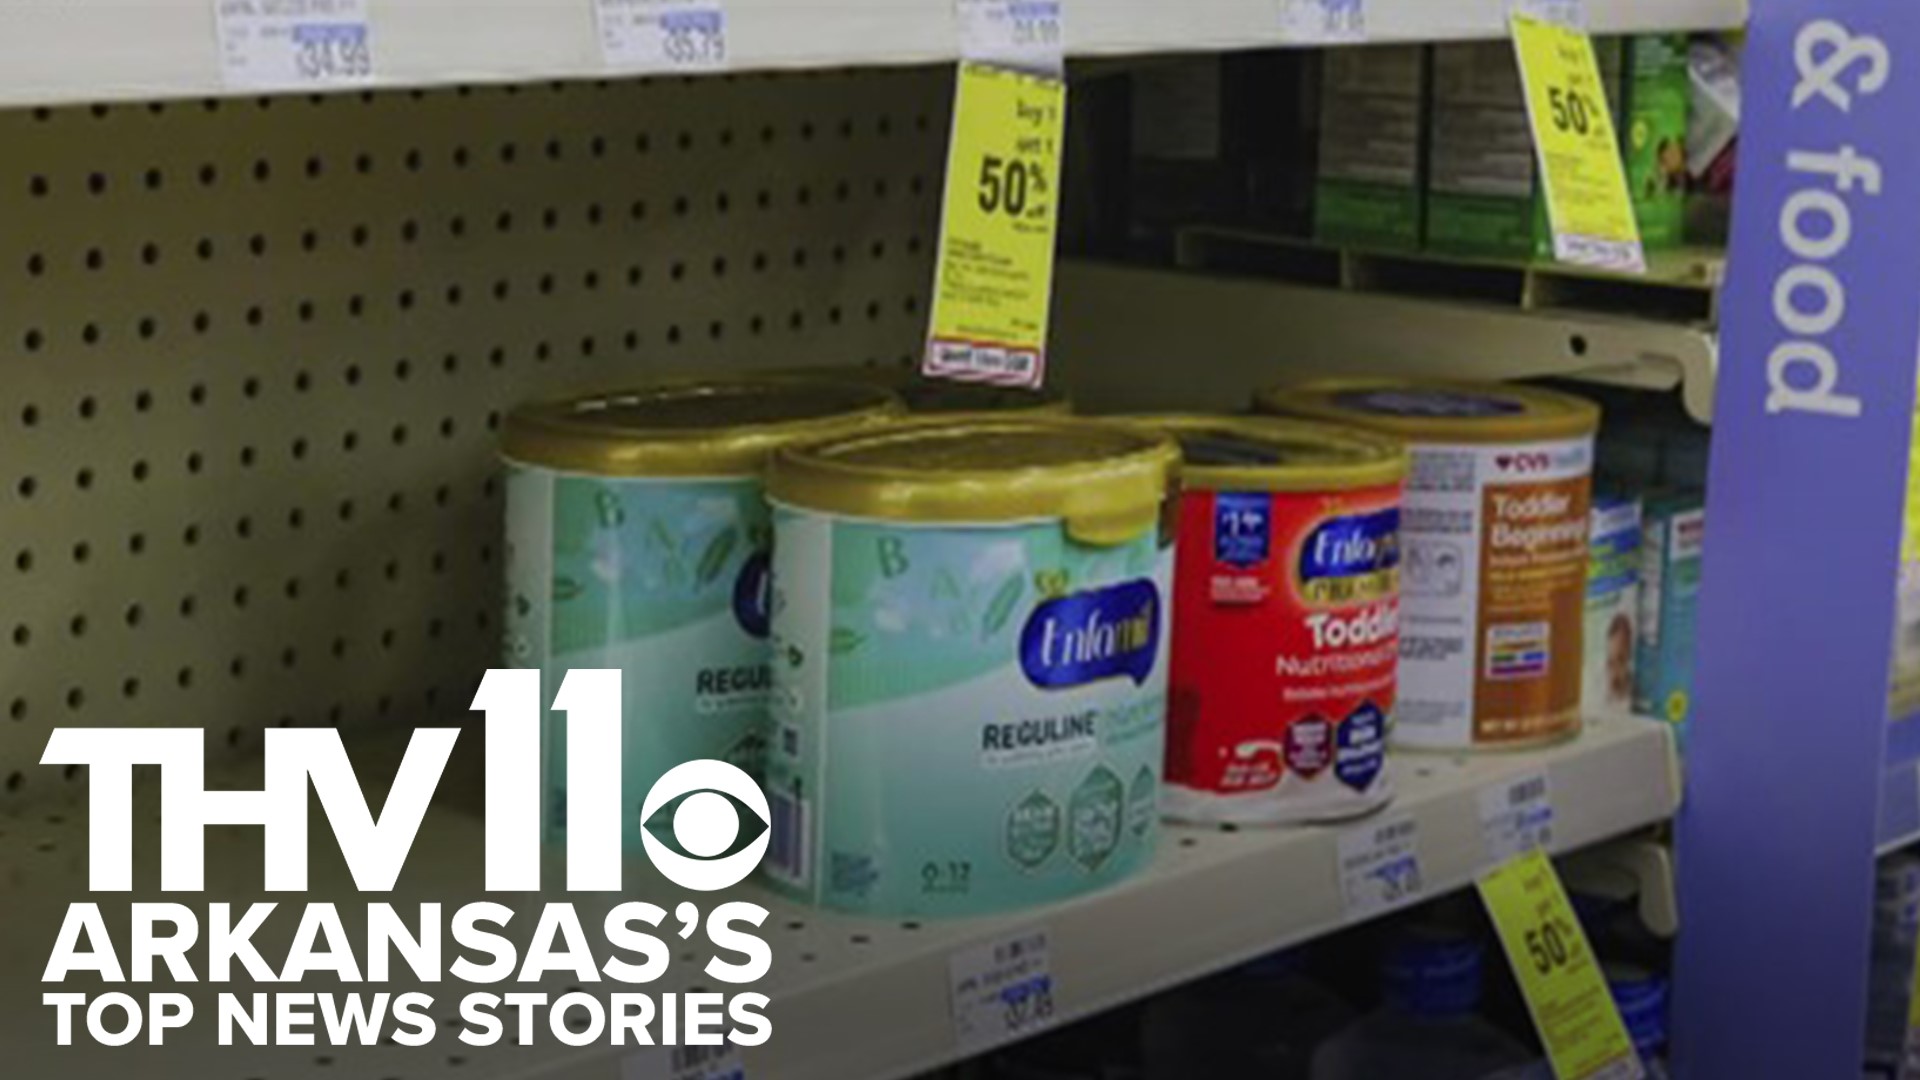 Rolly Hoyt provides the top news stories in Arkansas including the the nationwide baby formula shortage.